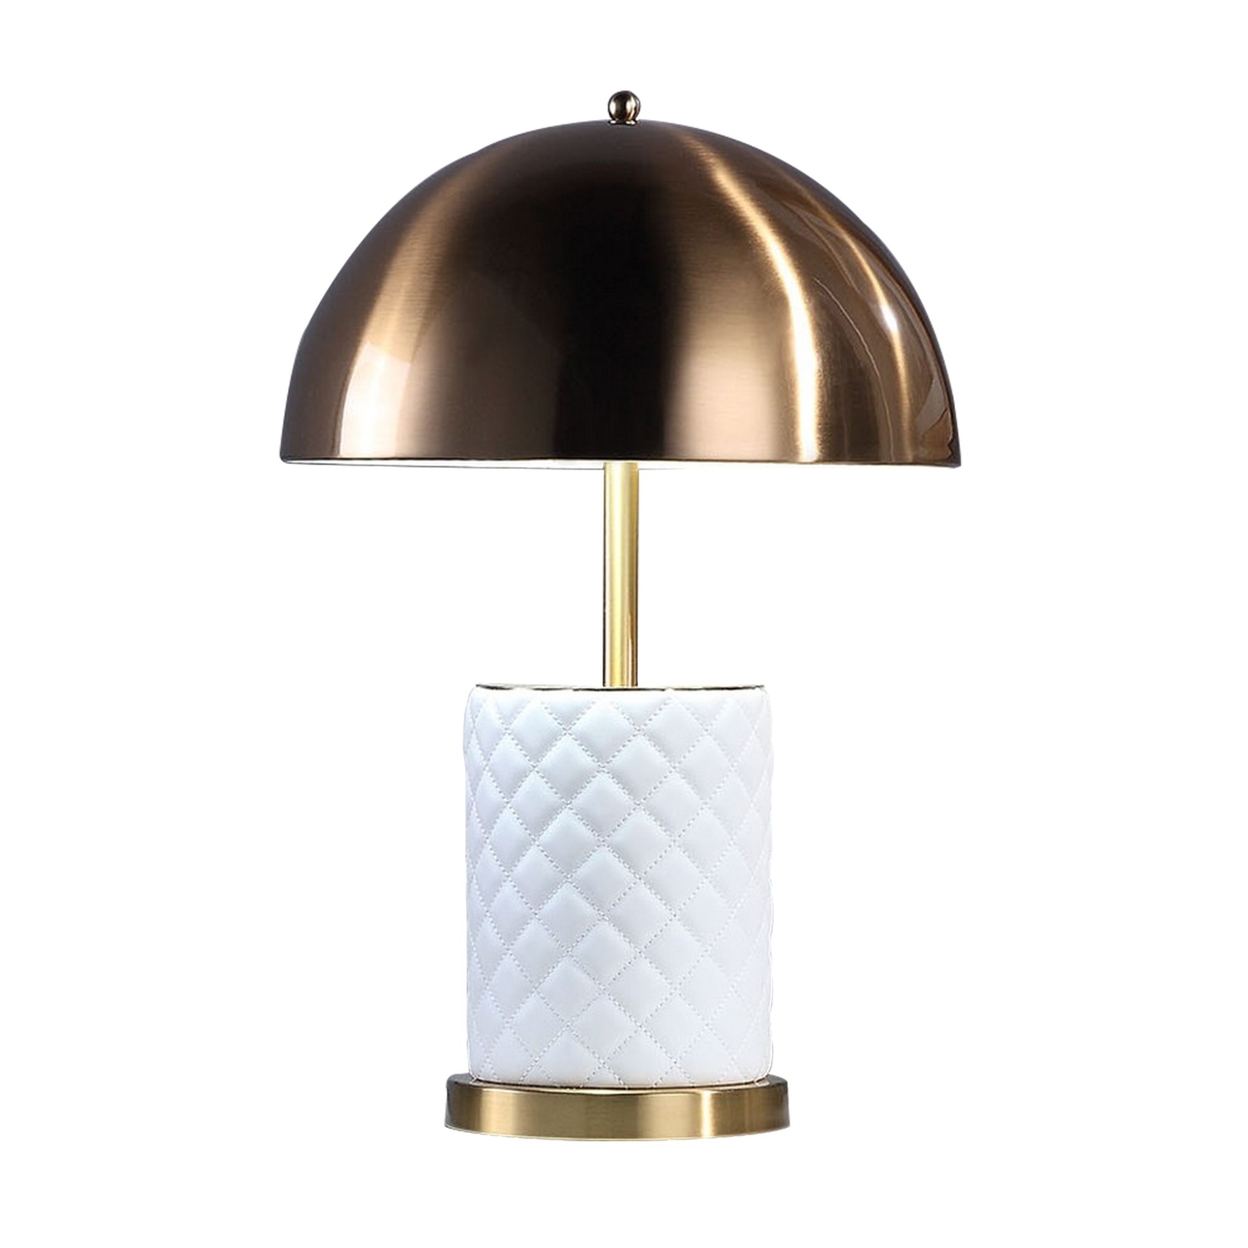 Aria 21 Inch Table Lamp, Dome Shade, Round Base, White Faux Leather, Brass -Saltoro Sherpi